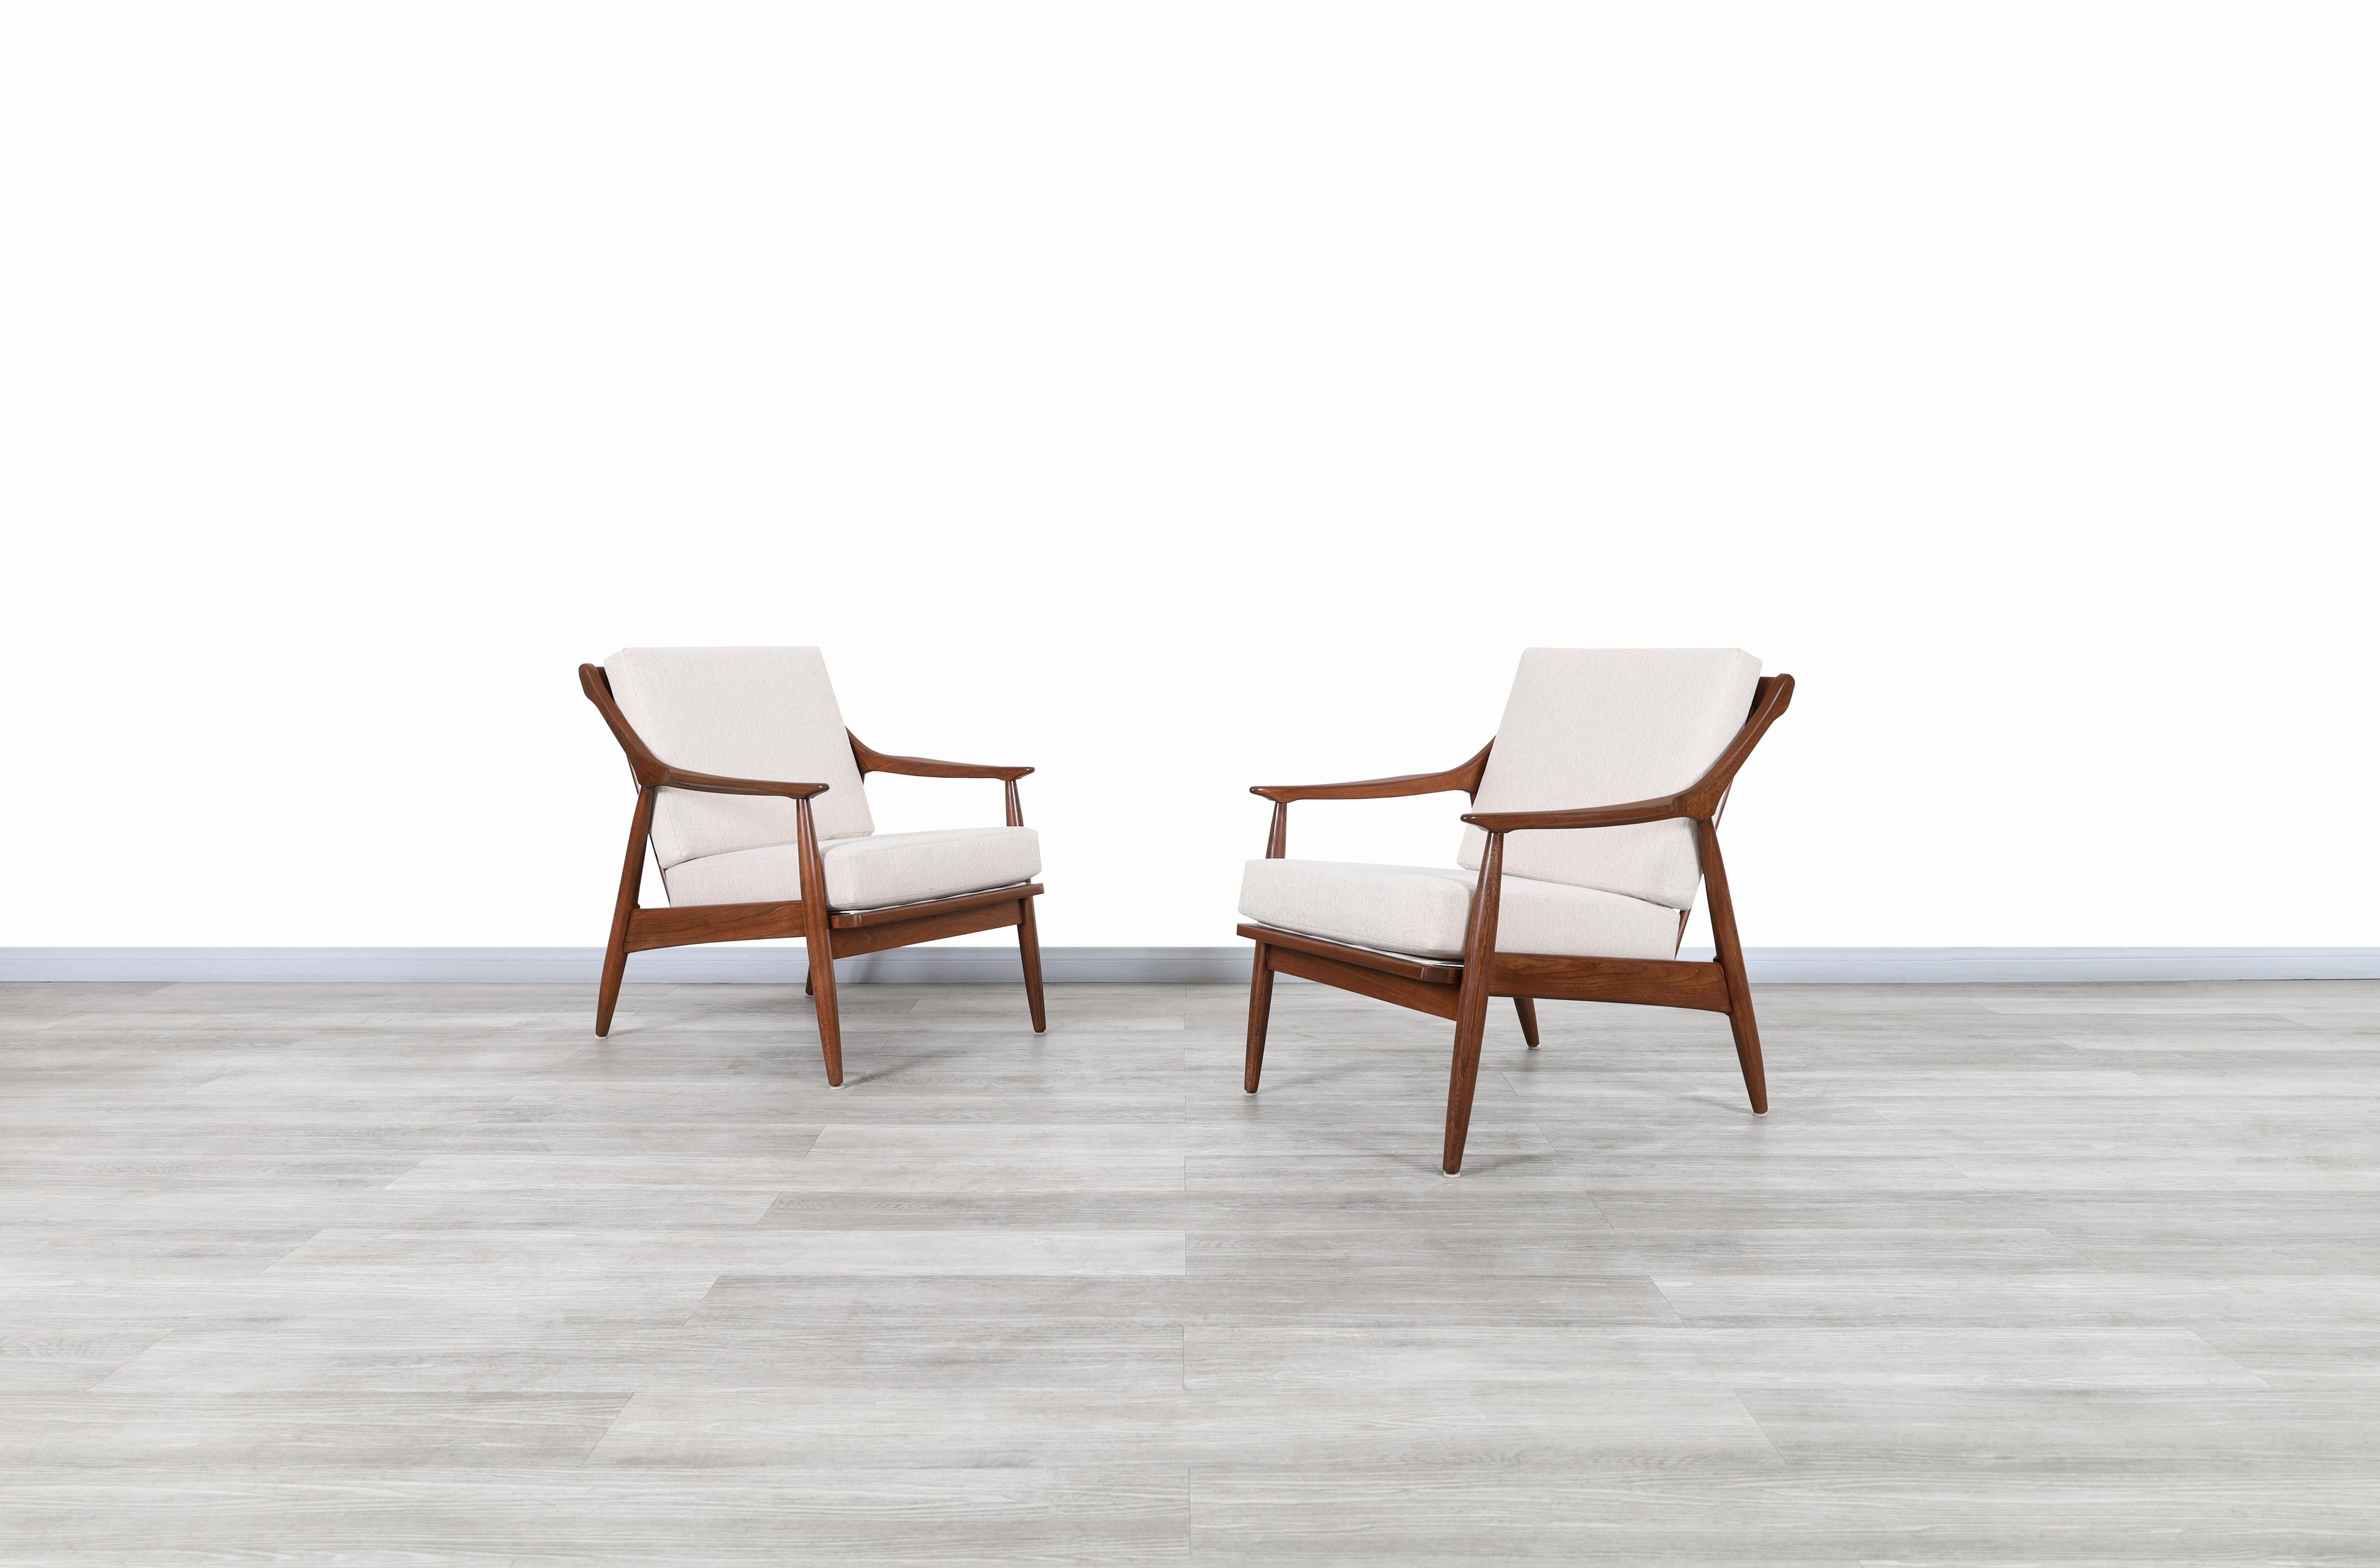 Stunning midcentury walnut lounge chairs by Kurt Ostervig for James Mobler in the United States, circa 1960s. These chairs have been built from the highest quality walnut wood and feature an ergonomic design where the user's comfort is prioritized.